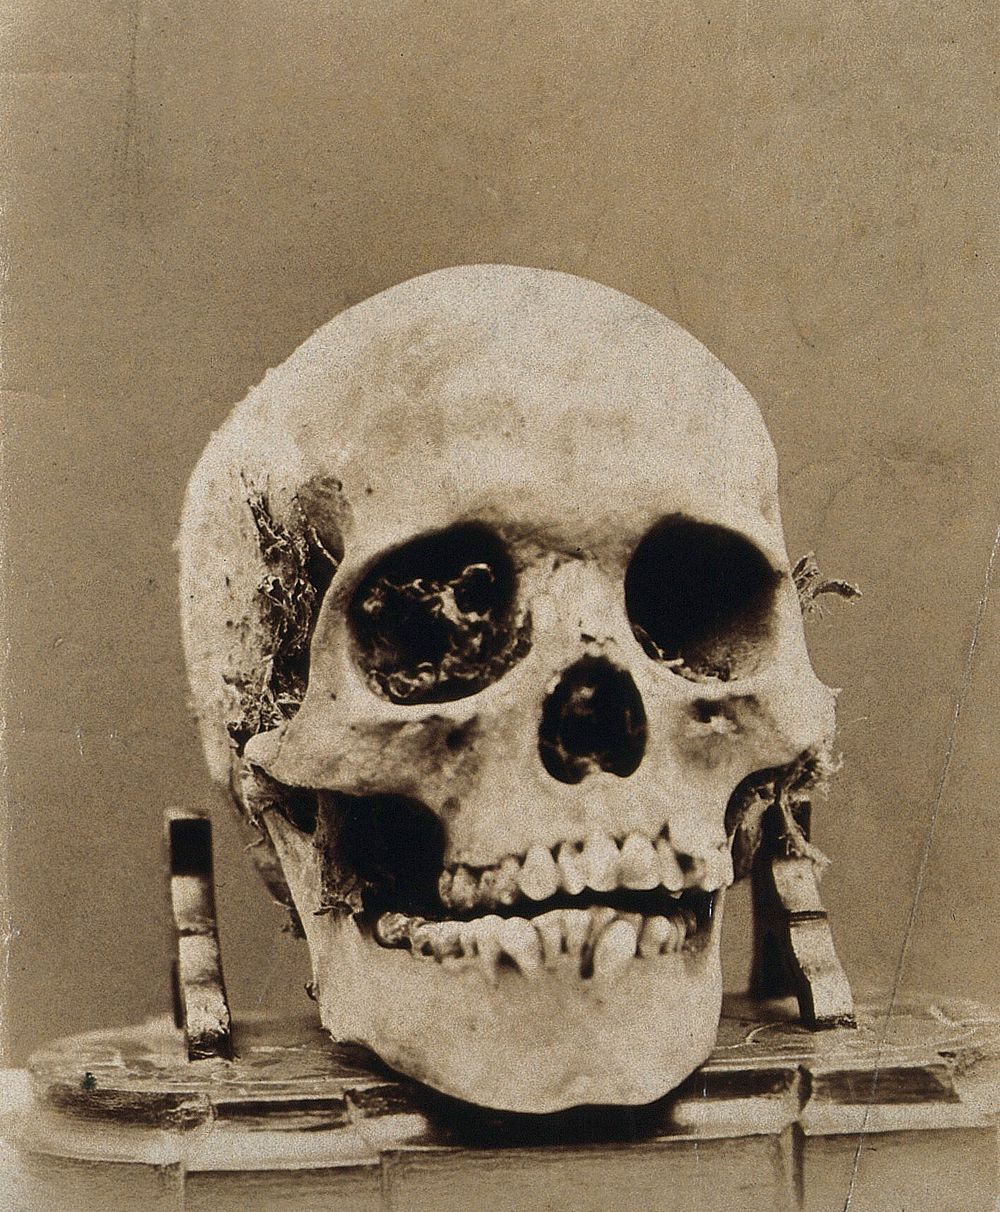 A skull from Peru. Photograph.